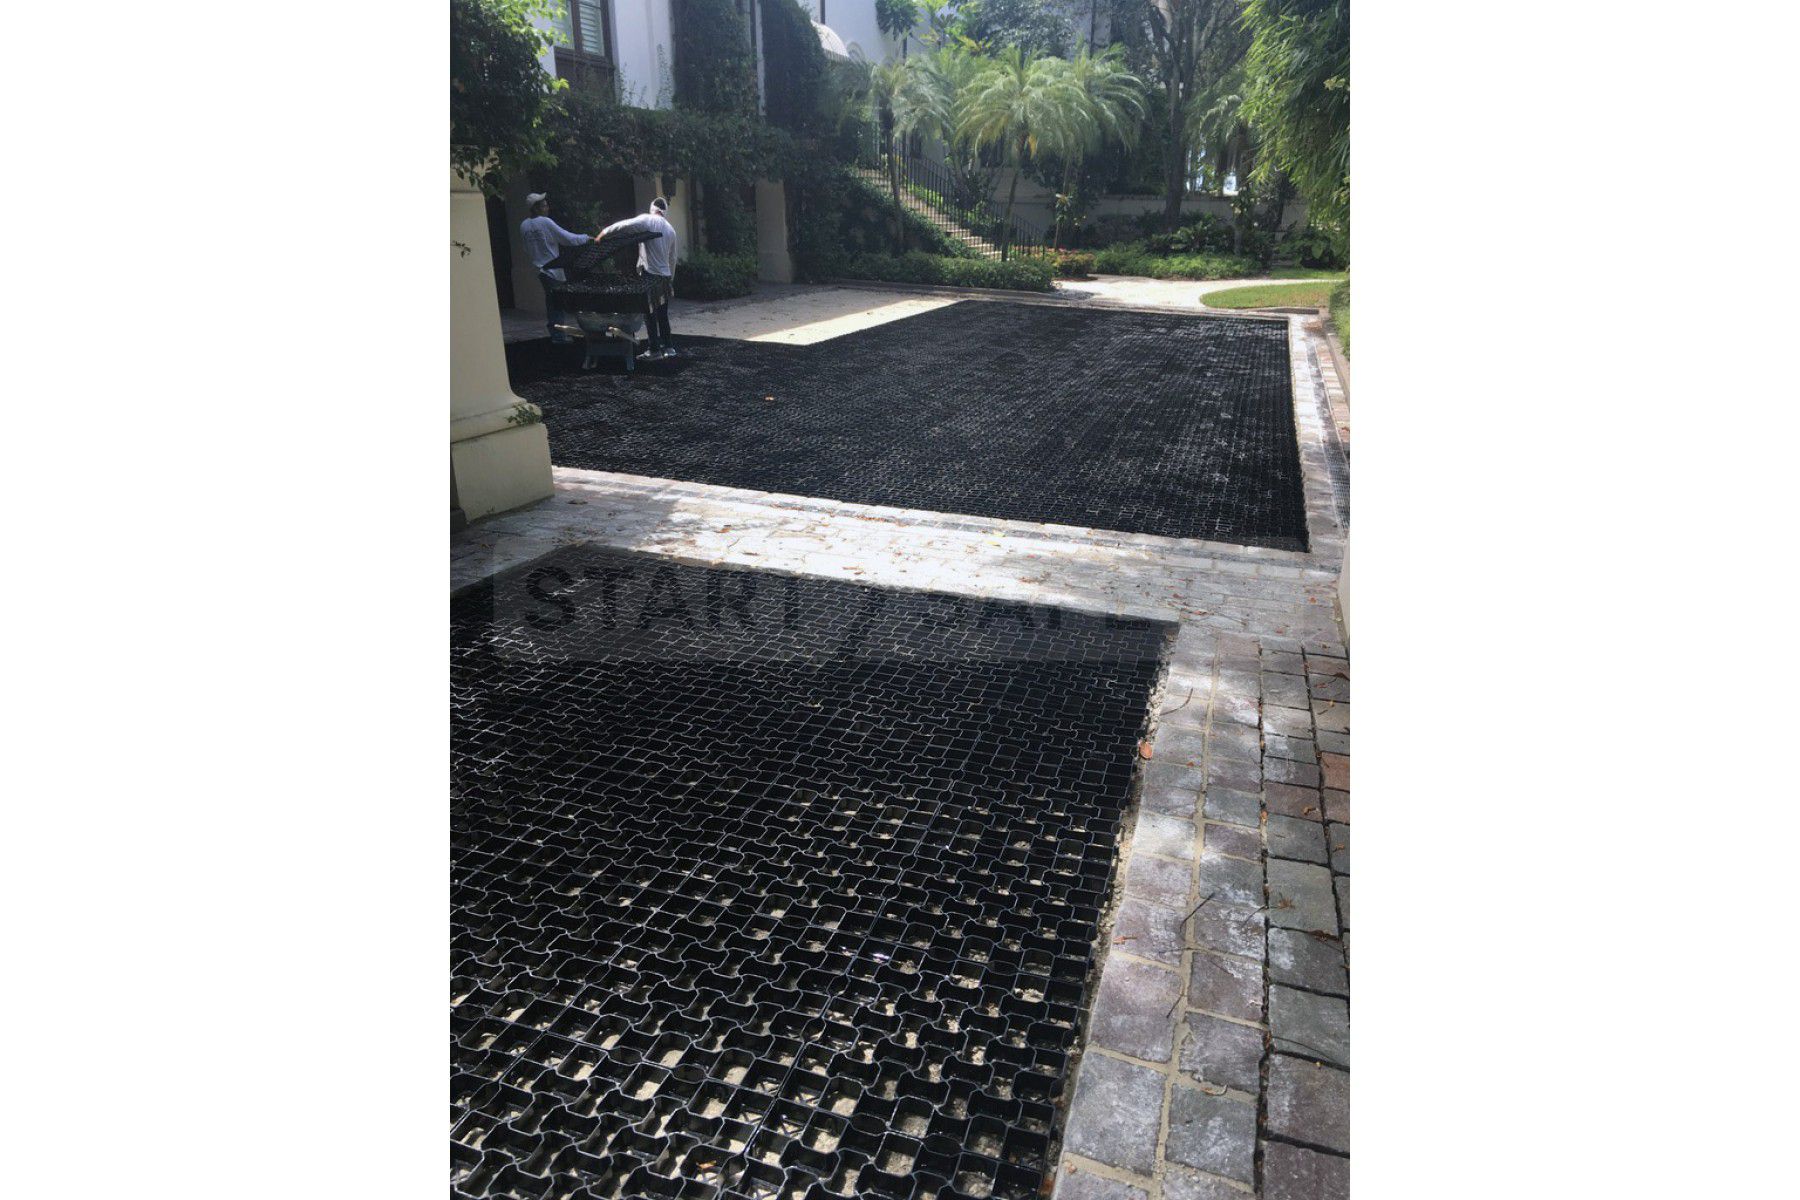 GRAVALOCK Permeable Paver 22 in. x 22 in. x 1 in. Black Slim Grid Plastic Pavers (12-Pavers/40.5 Sq. ft.) S562HD